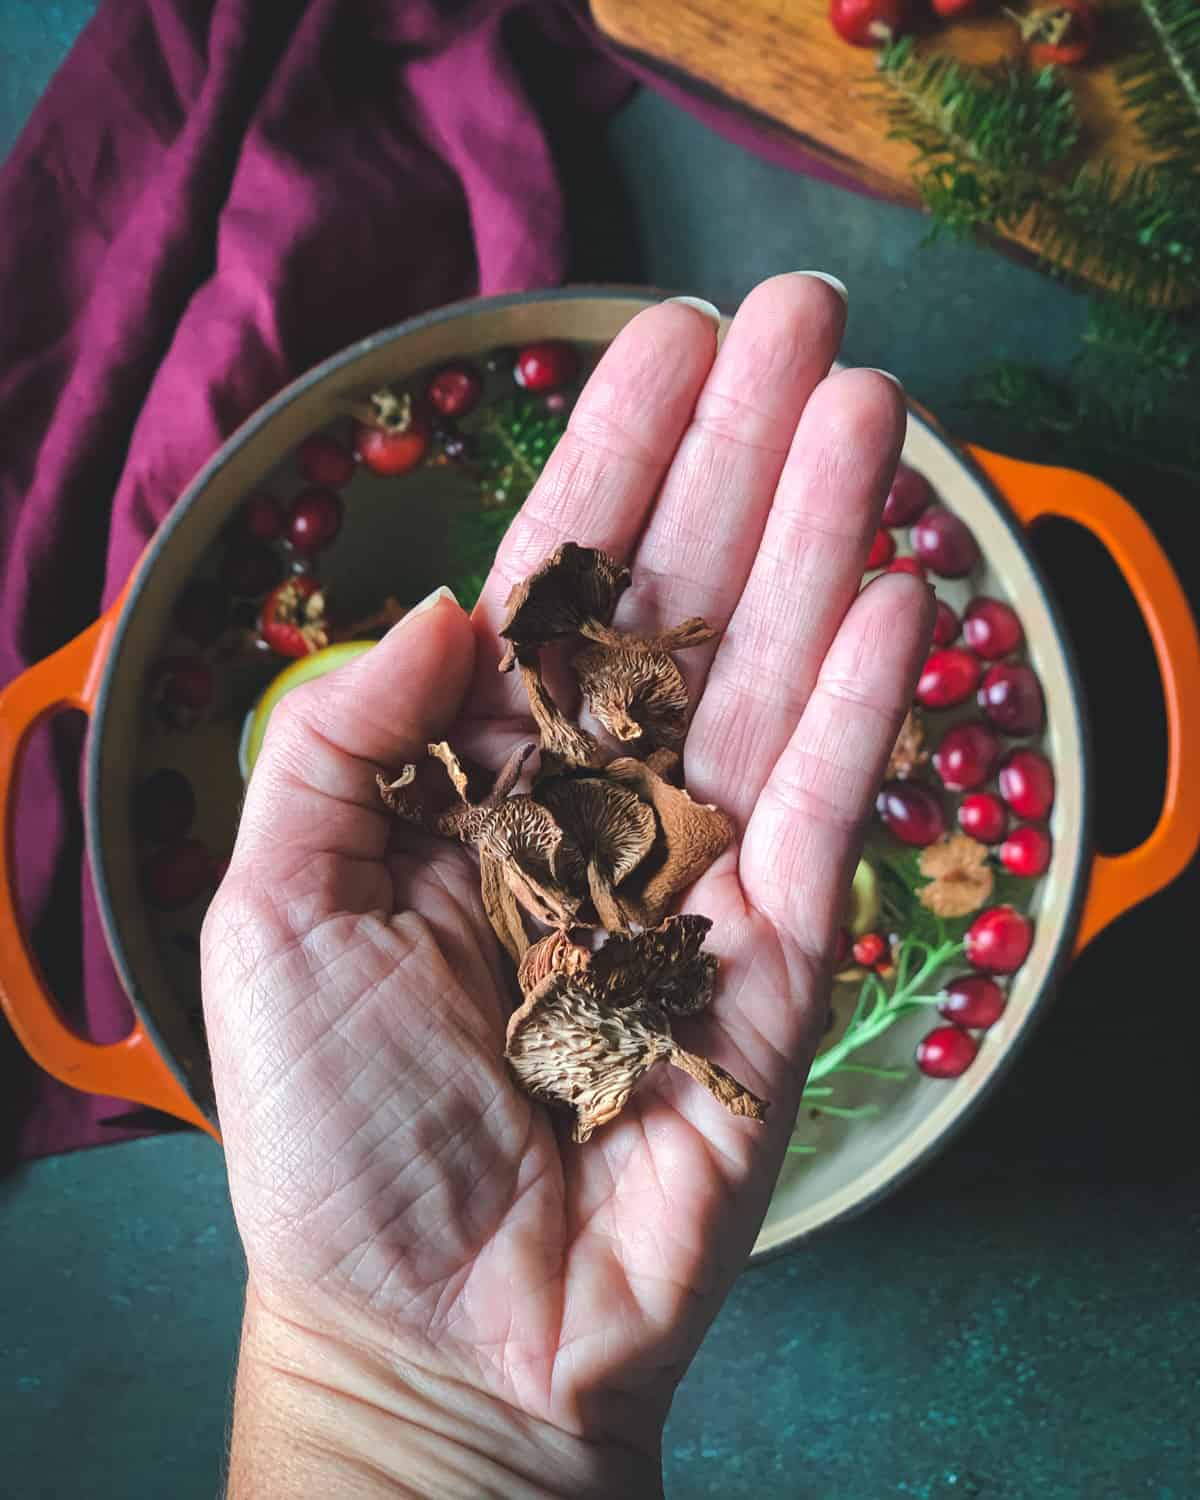 a hand holding dried candy cap mushrooms